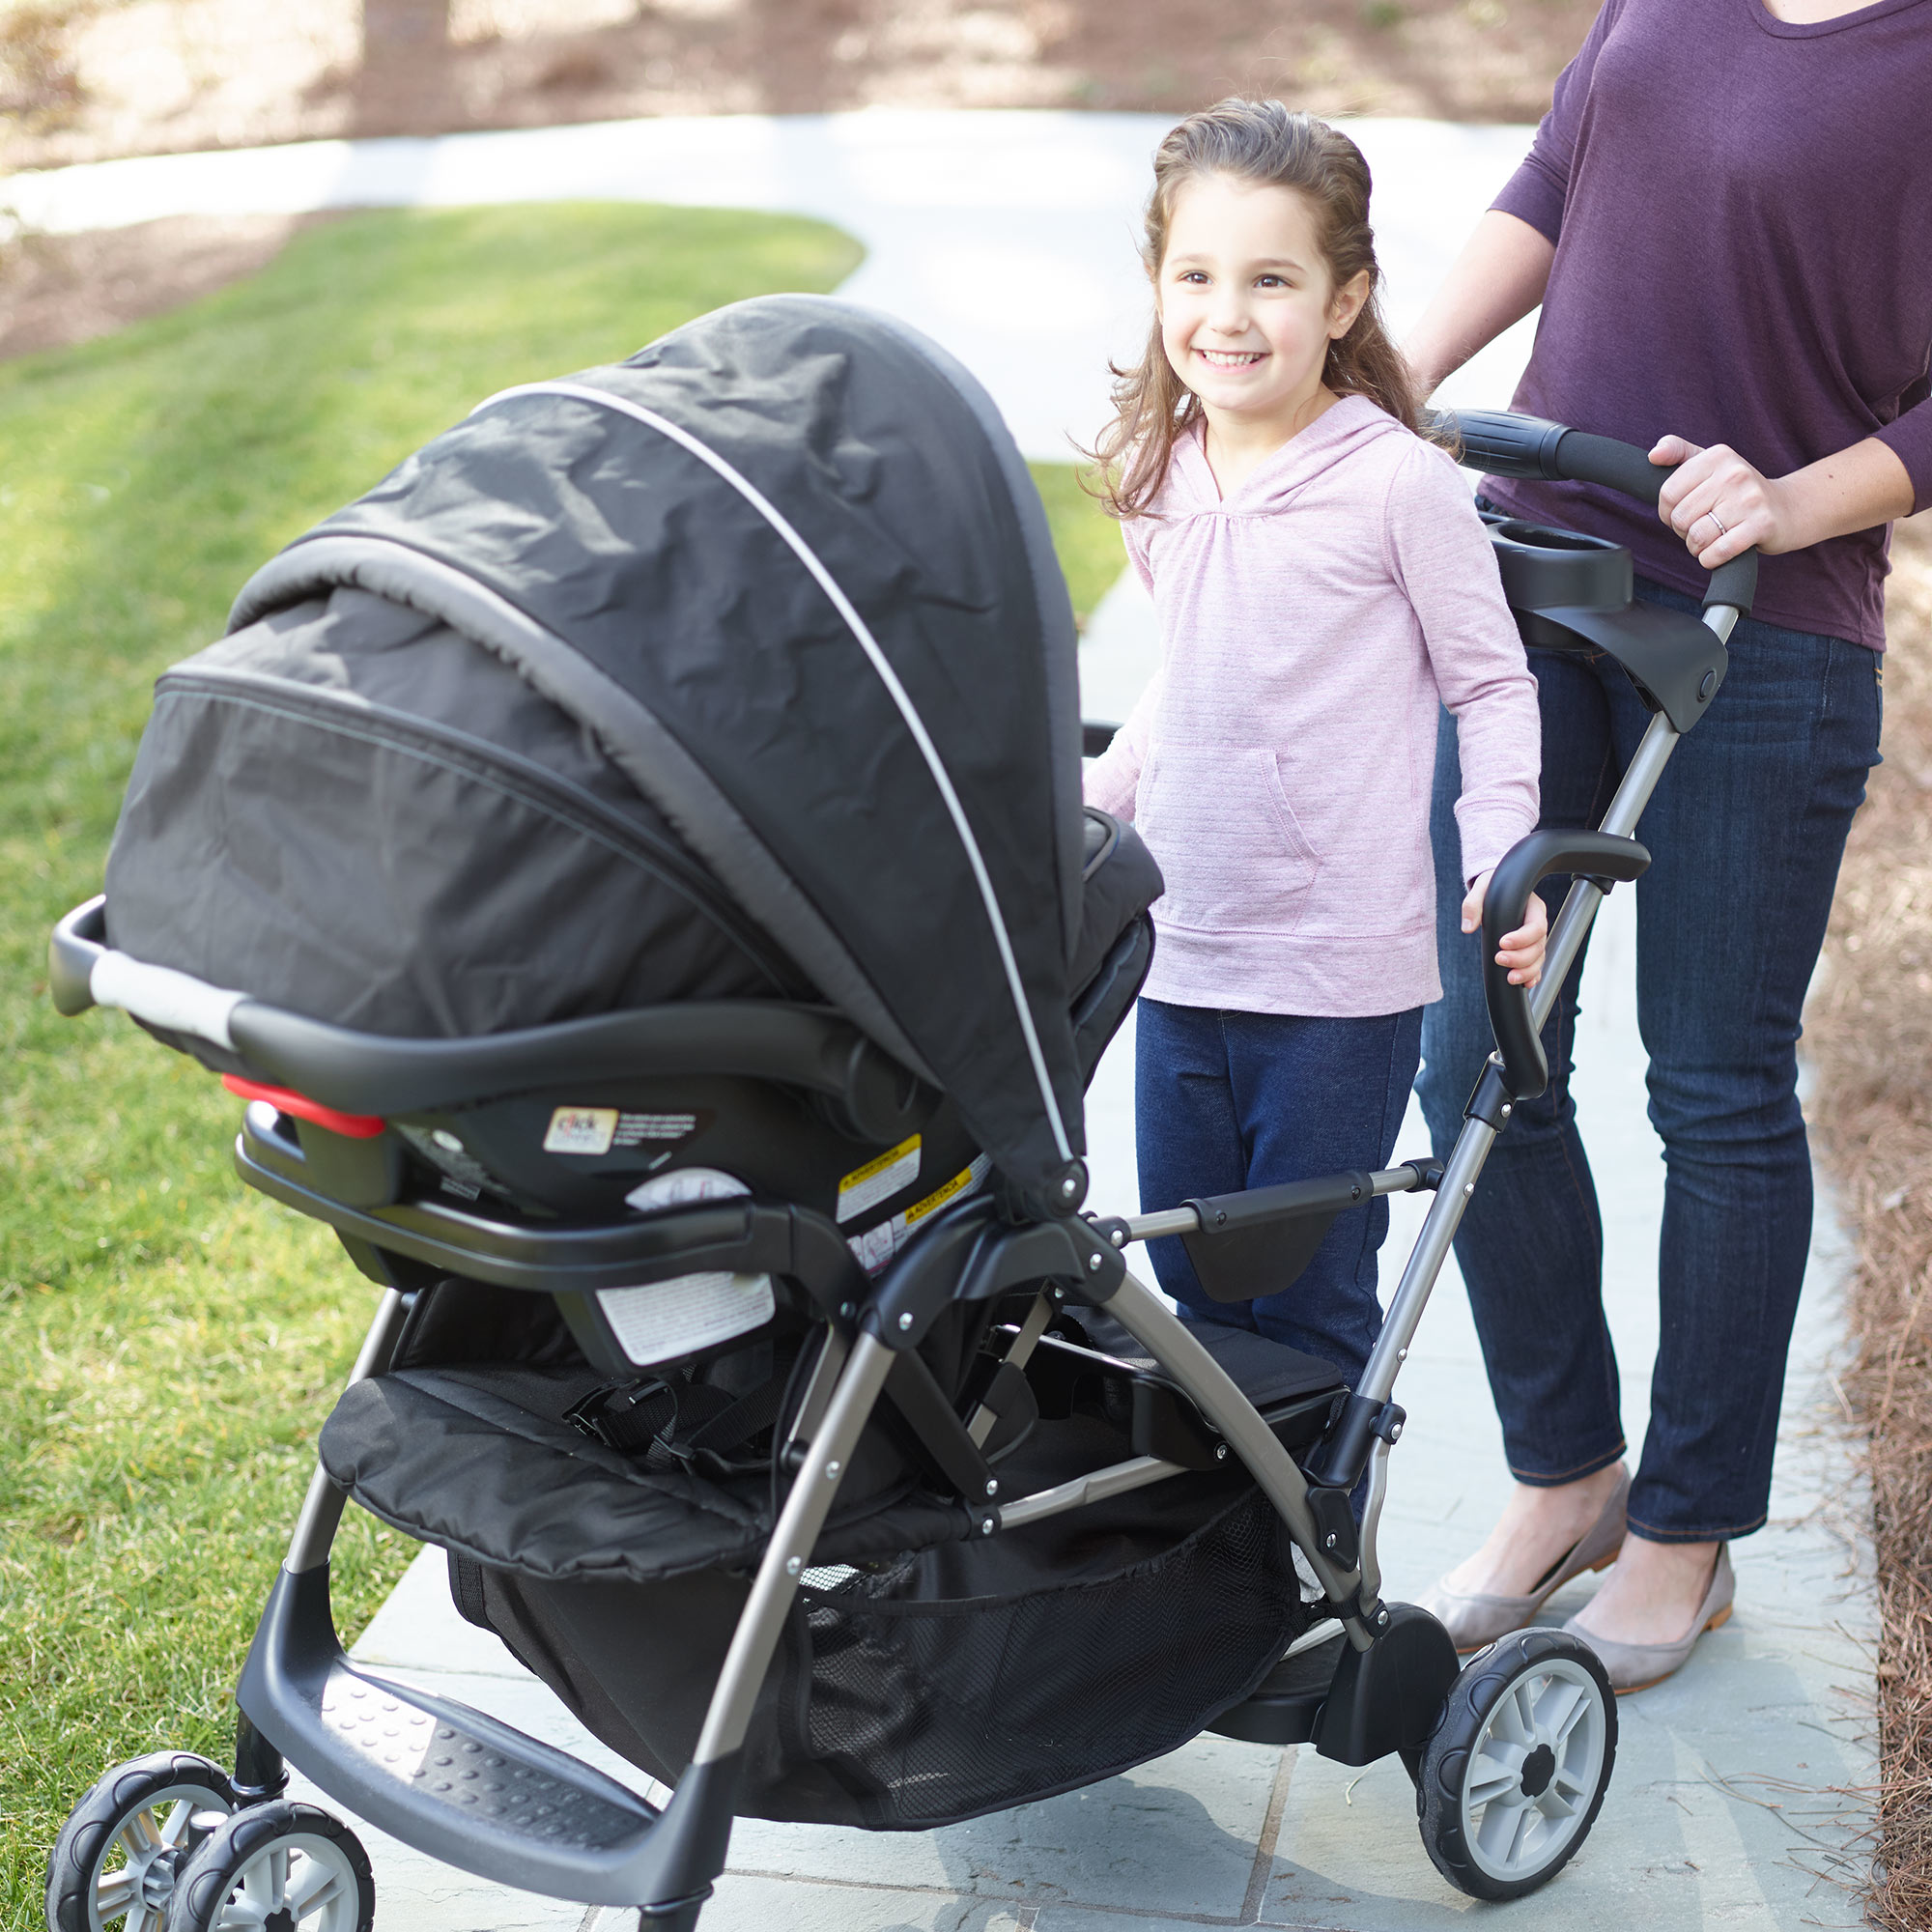 stand and ride stroller